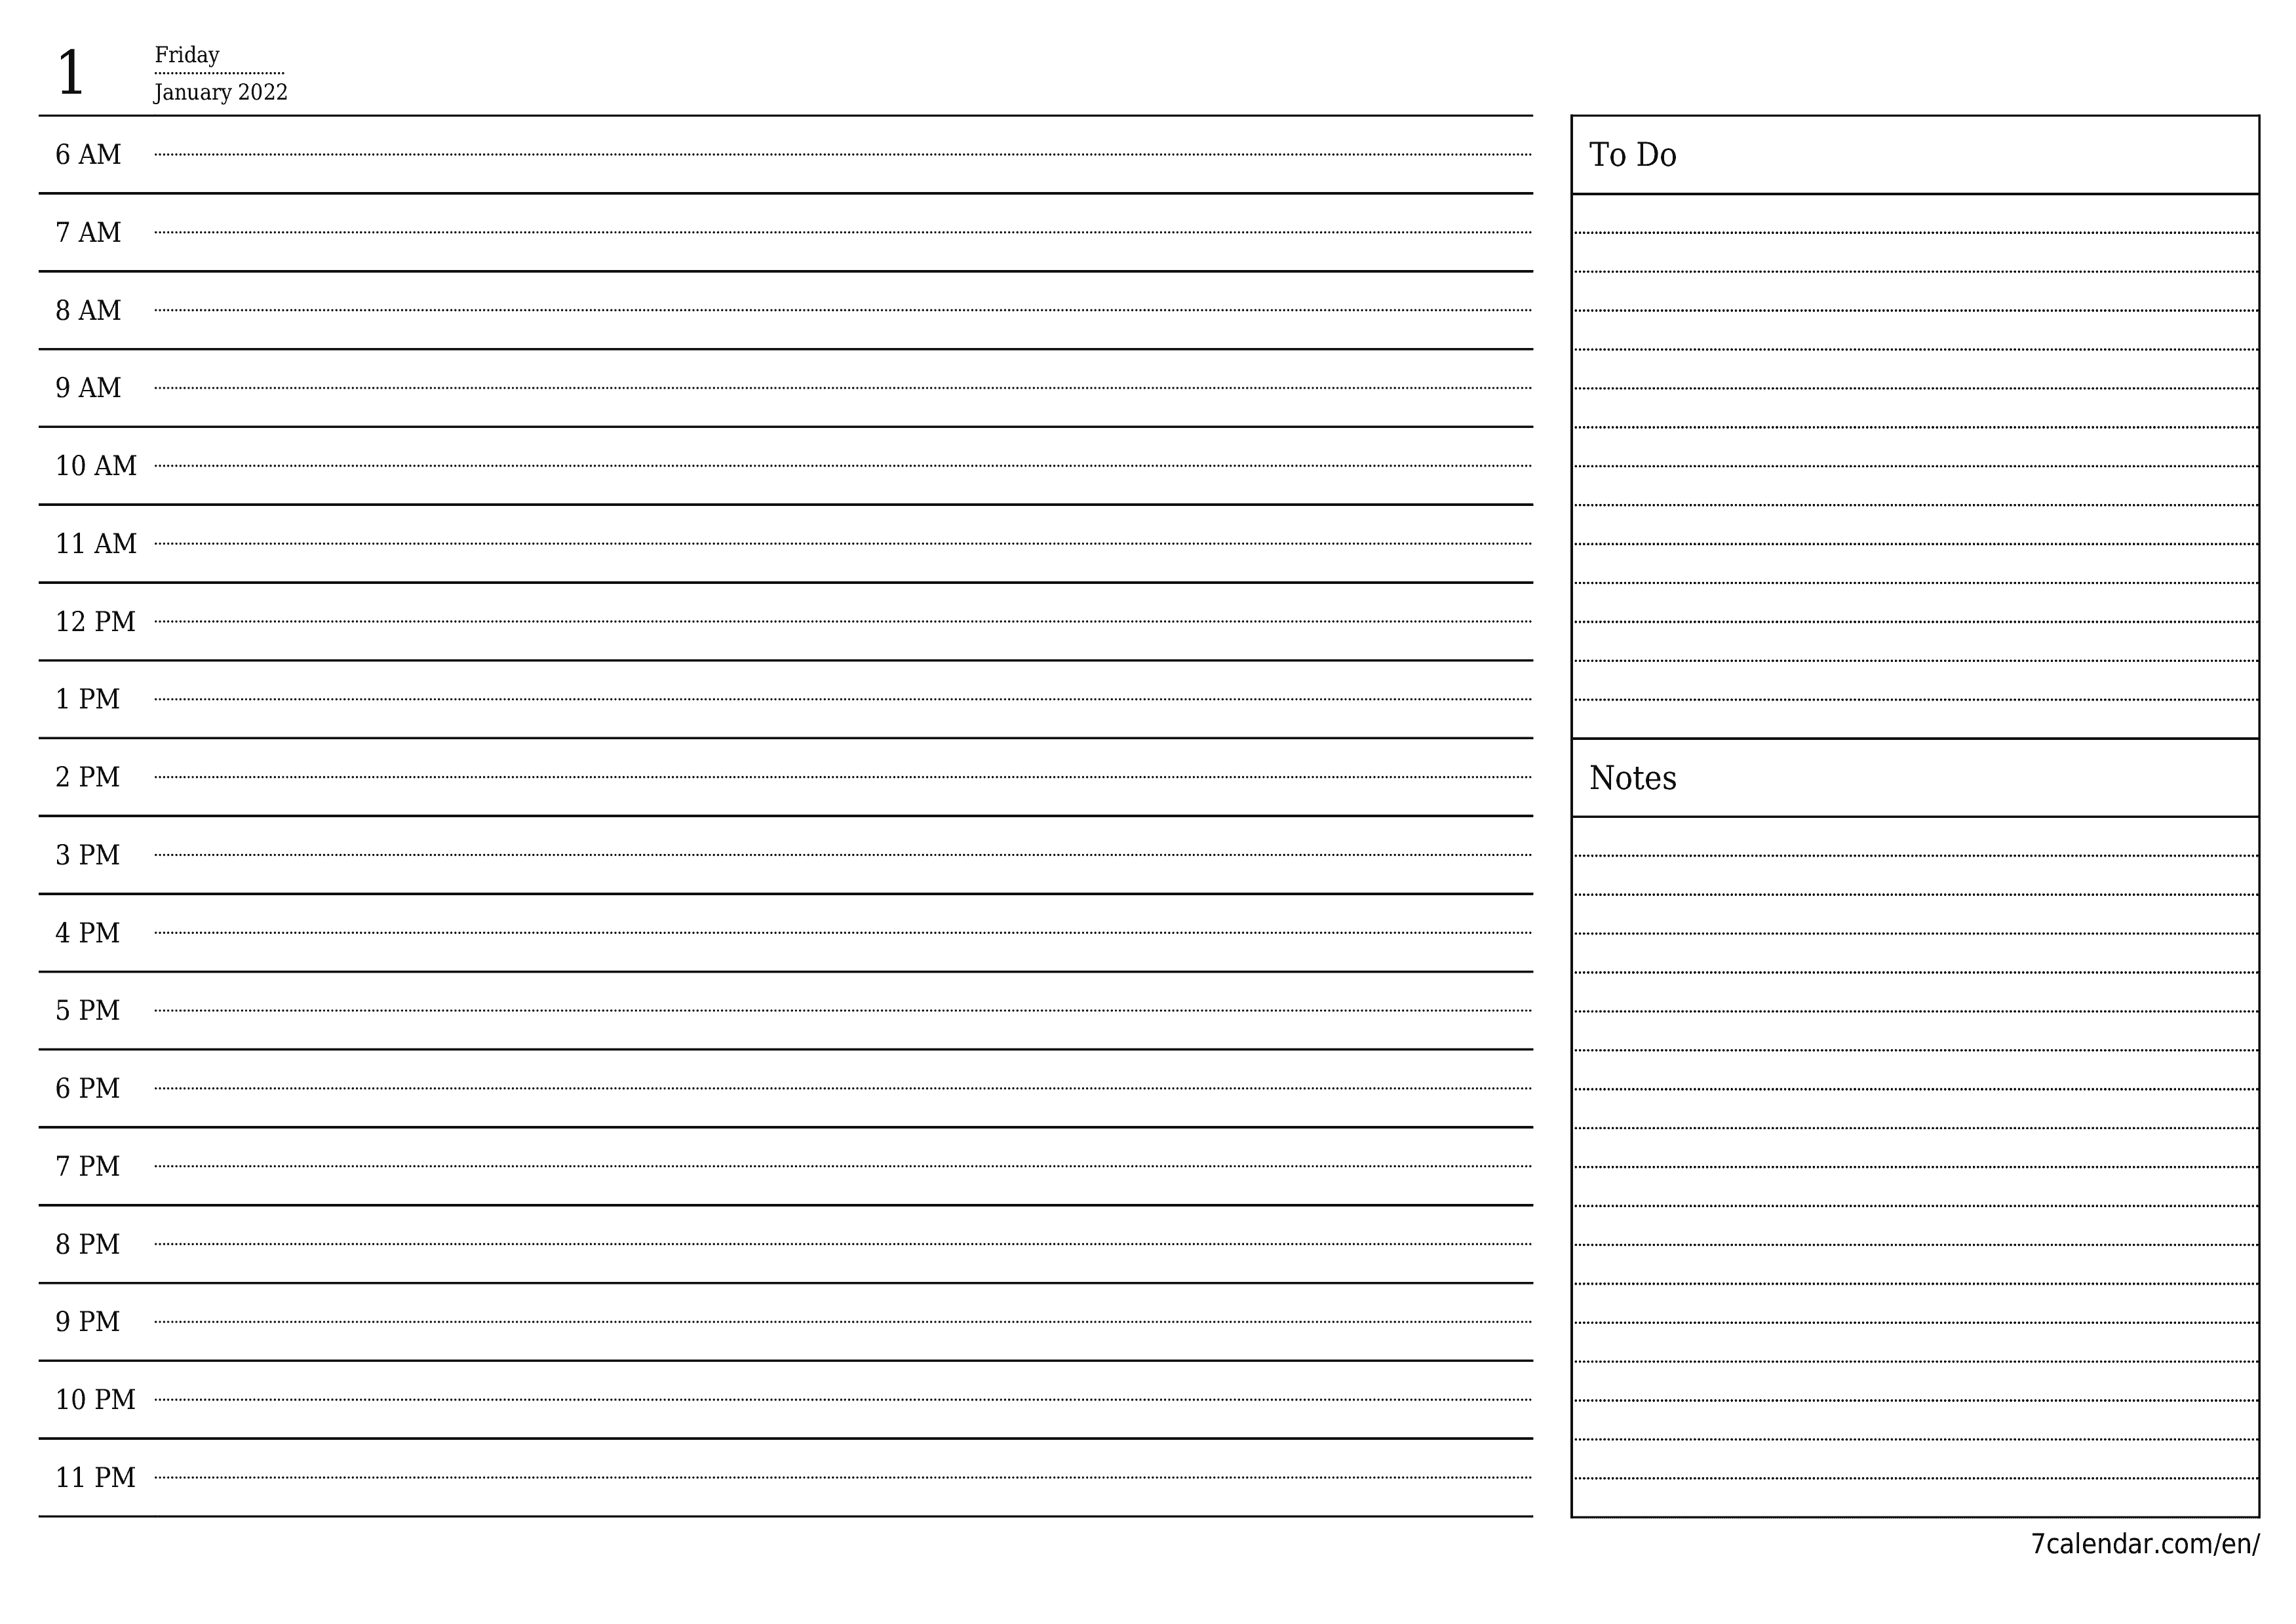 Blank daily calendar planner for day January 2022 with notes, save and print to PDF PNG English - 7calendar.com